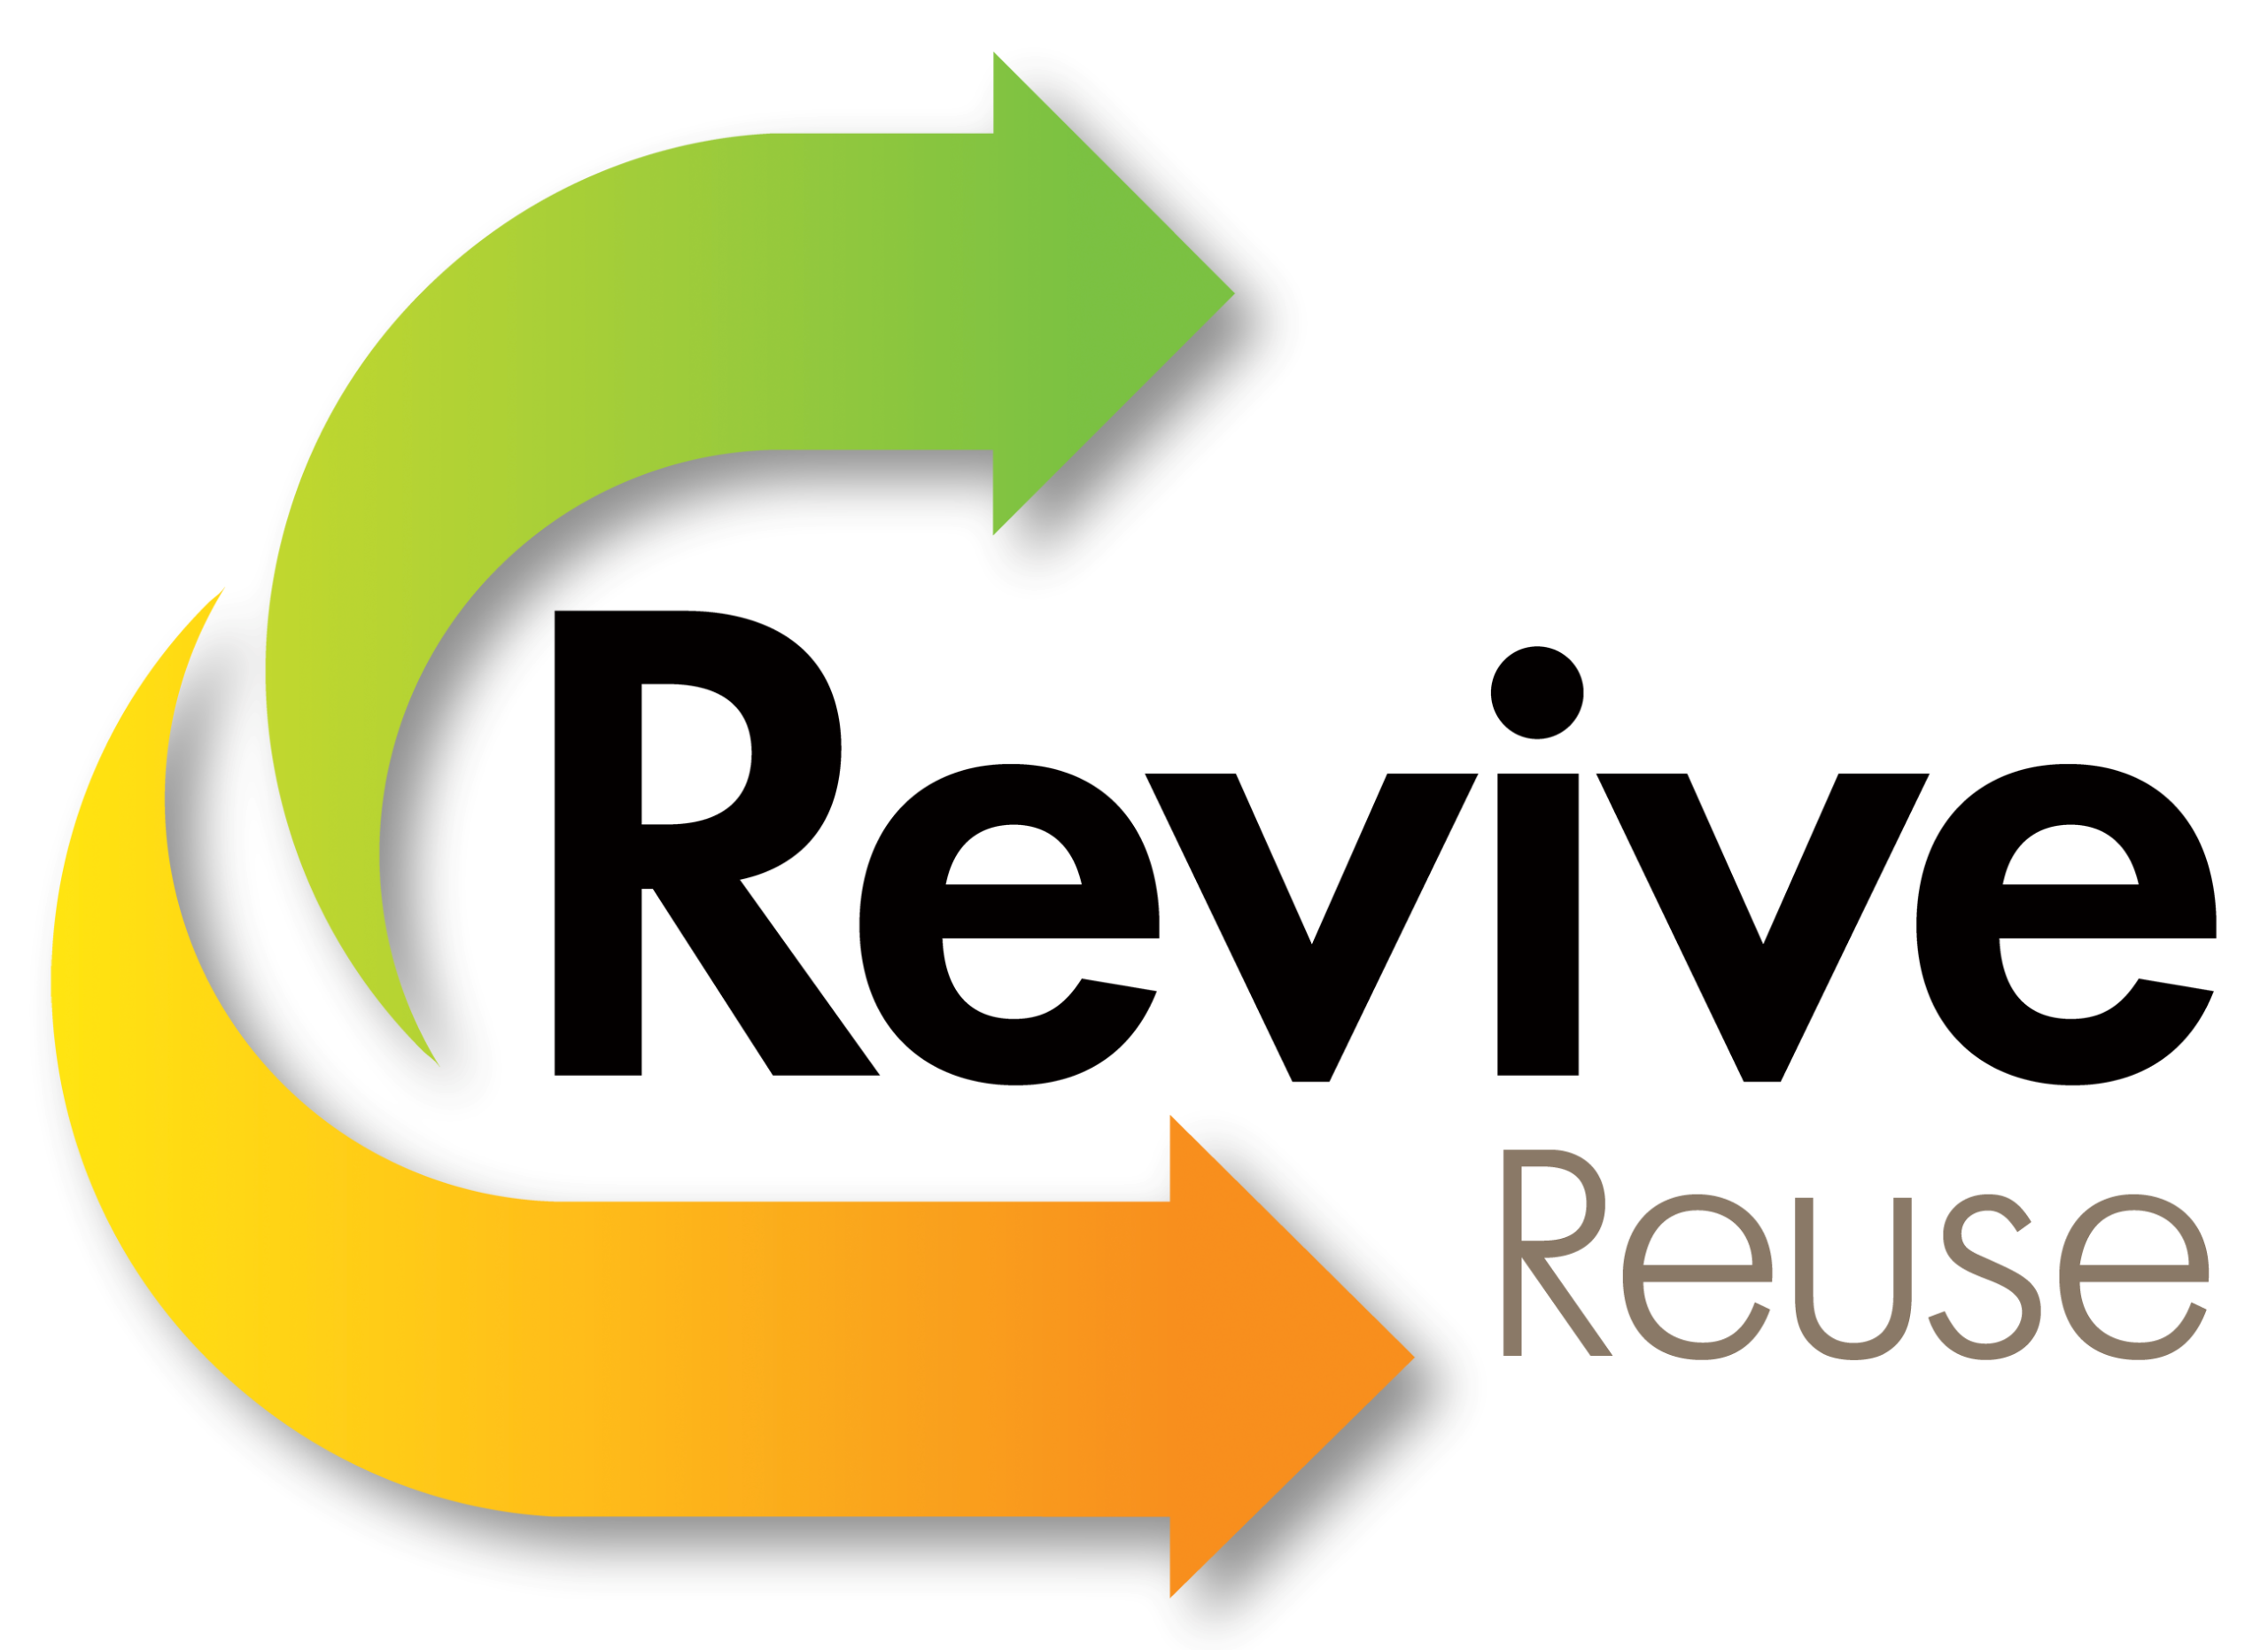 Image features two arrows, one in green and one in orange. To the right, text is displayed that reads "Revive" in black and underneath that "Reuse" in brown.